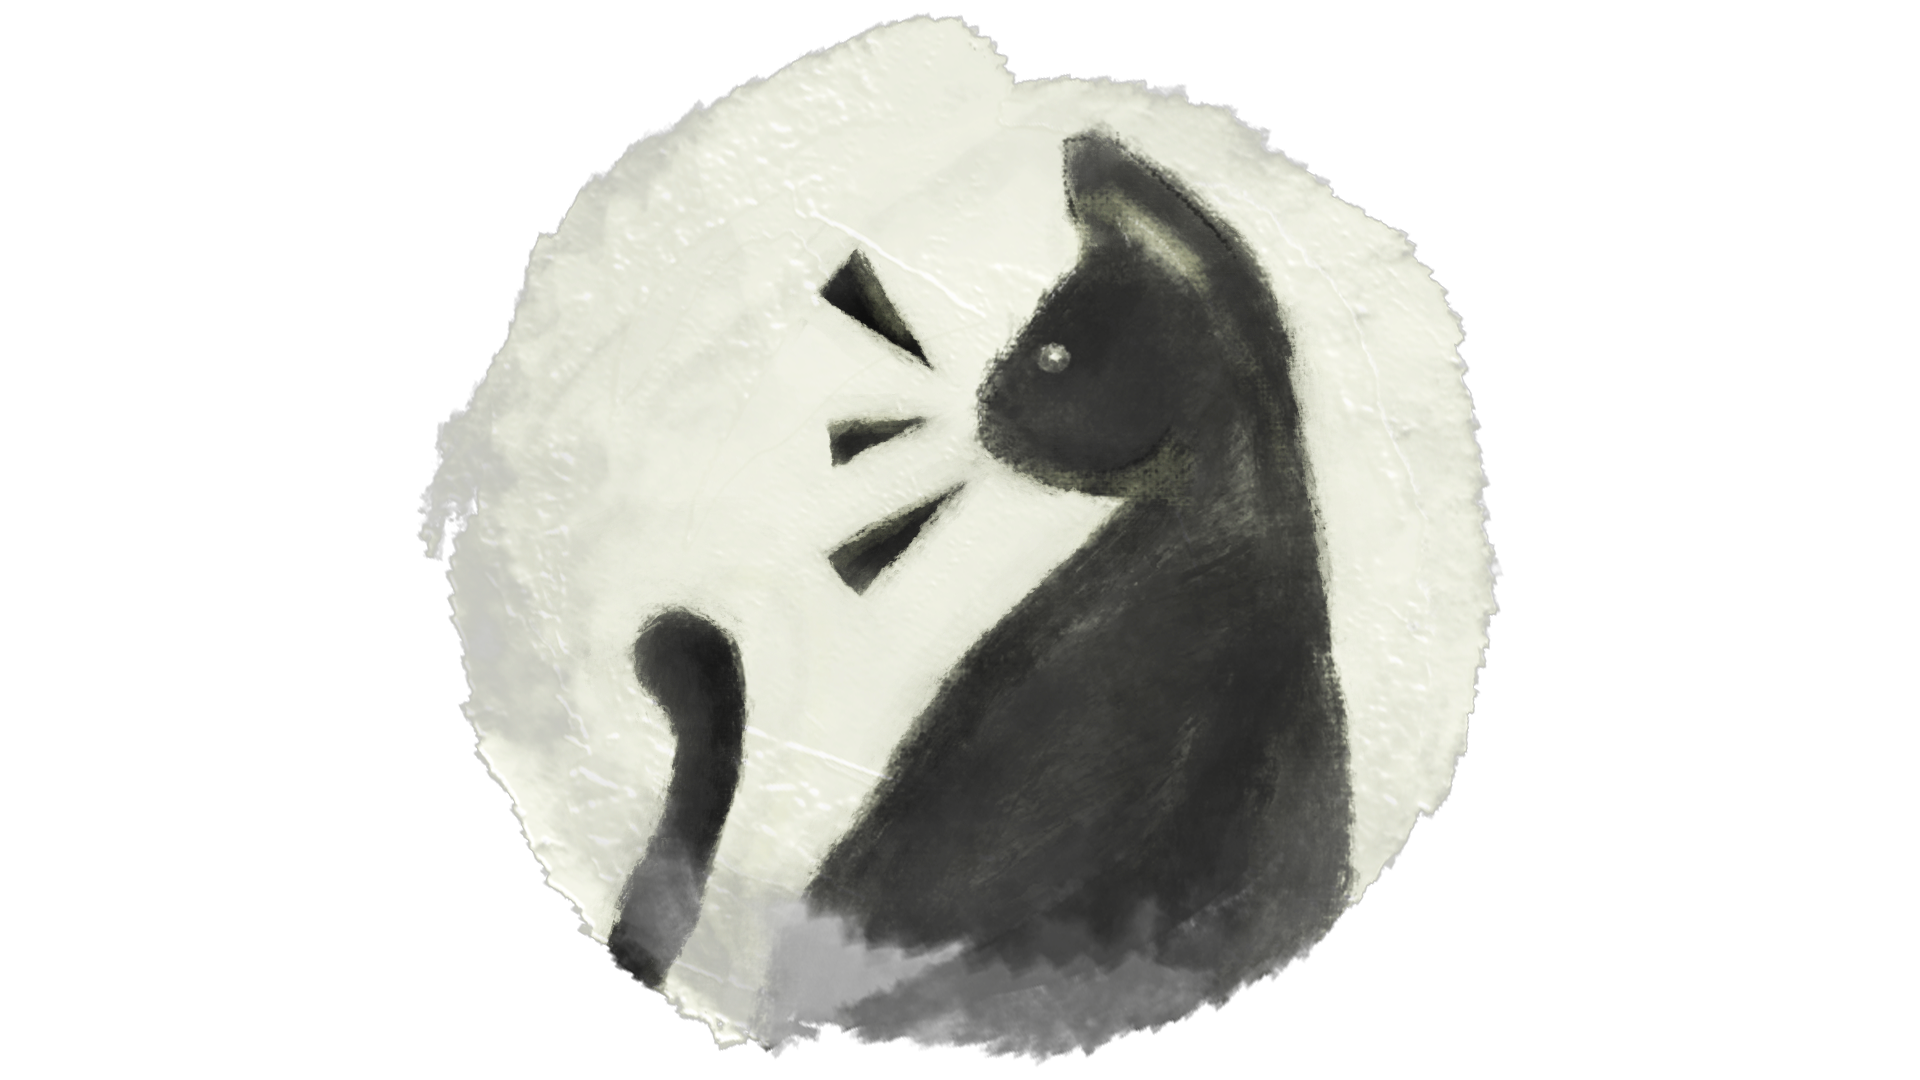 Icon for Puurrfect